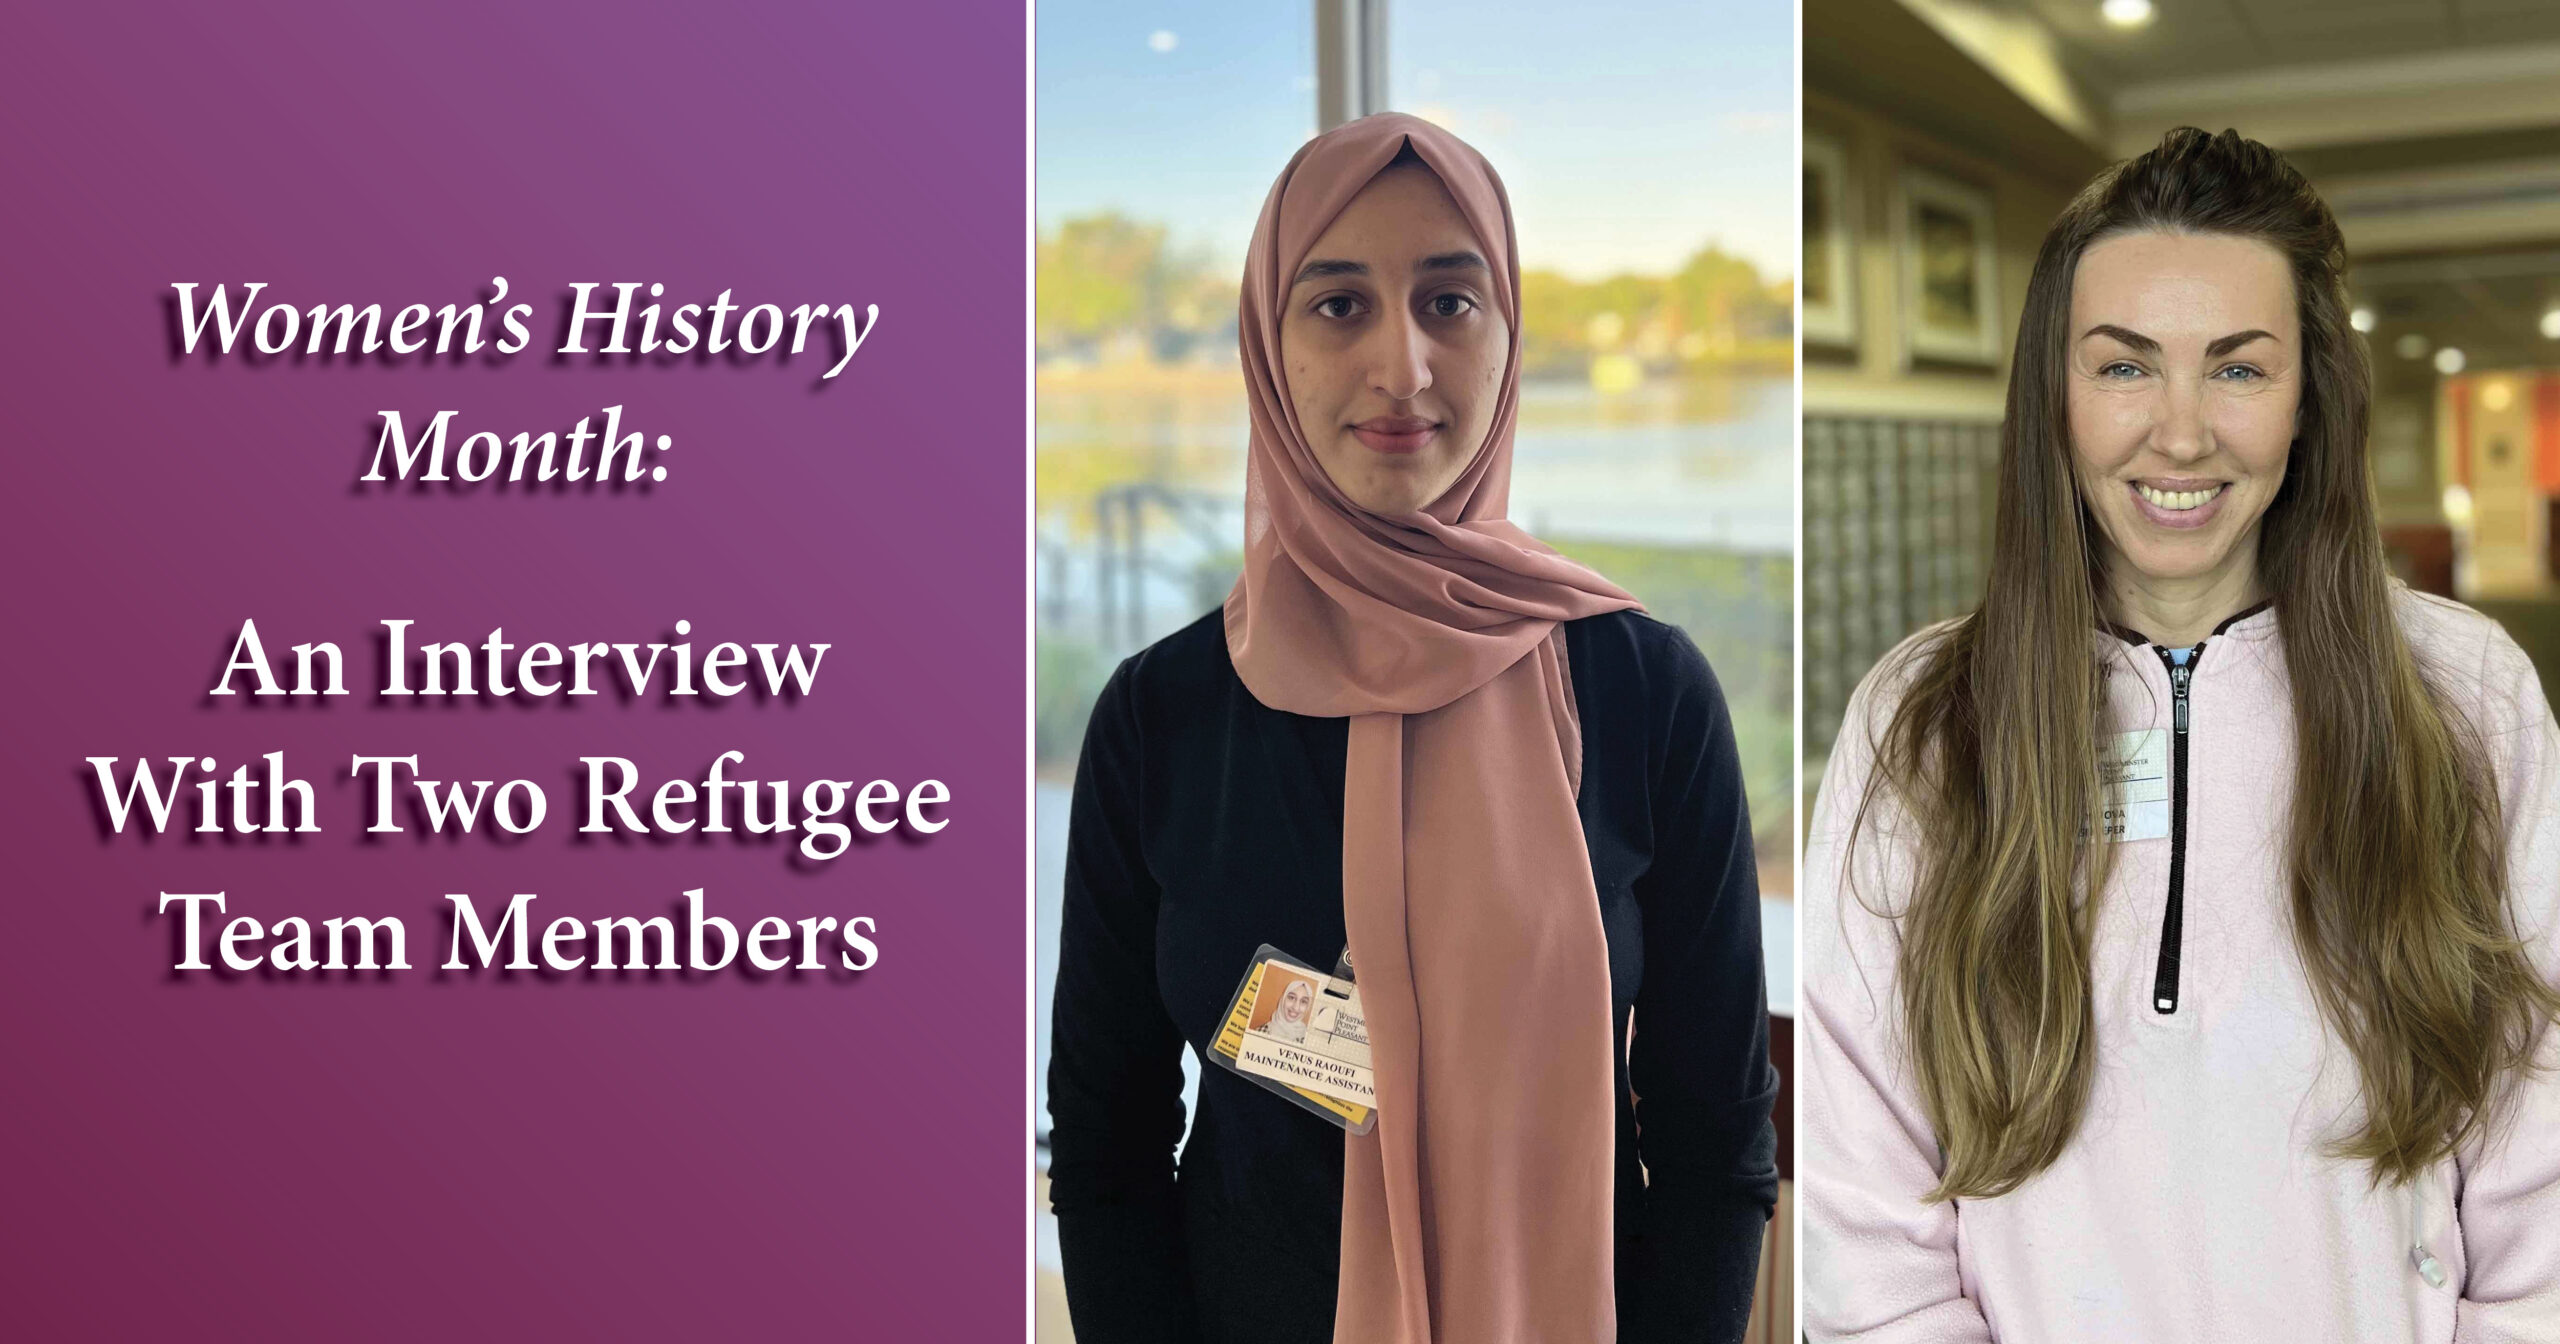 Women’s History Month: An Interview With Two Refugee Team Members